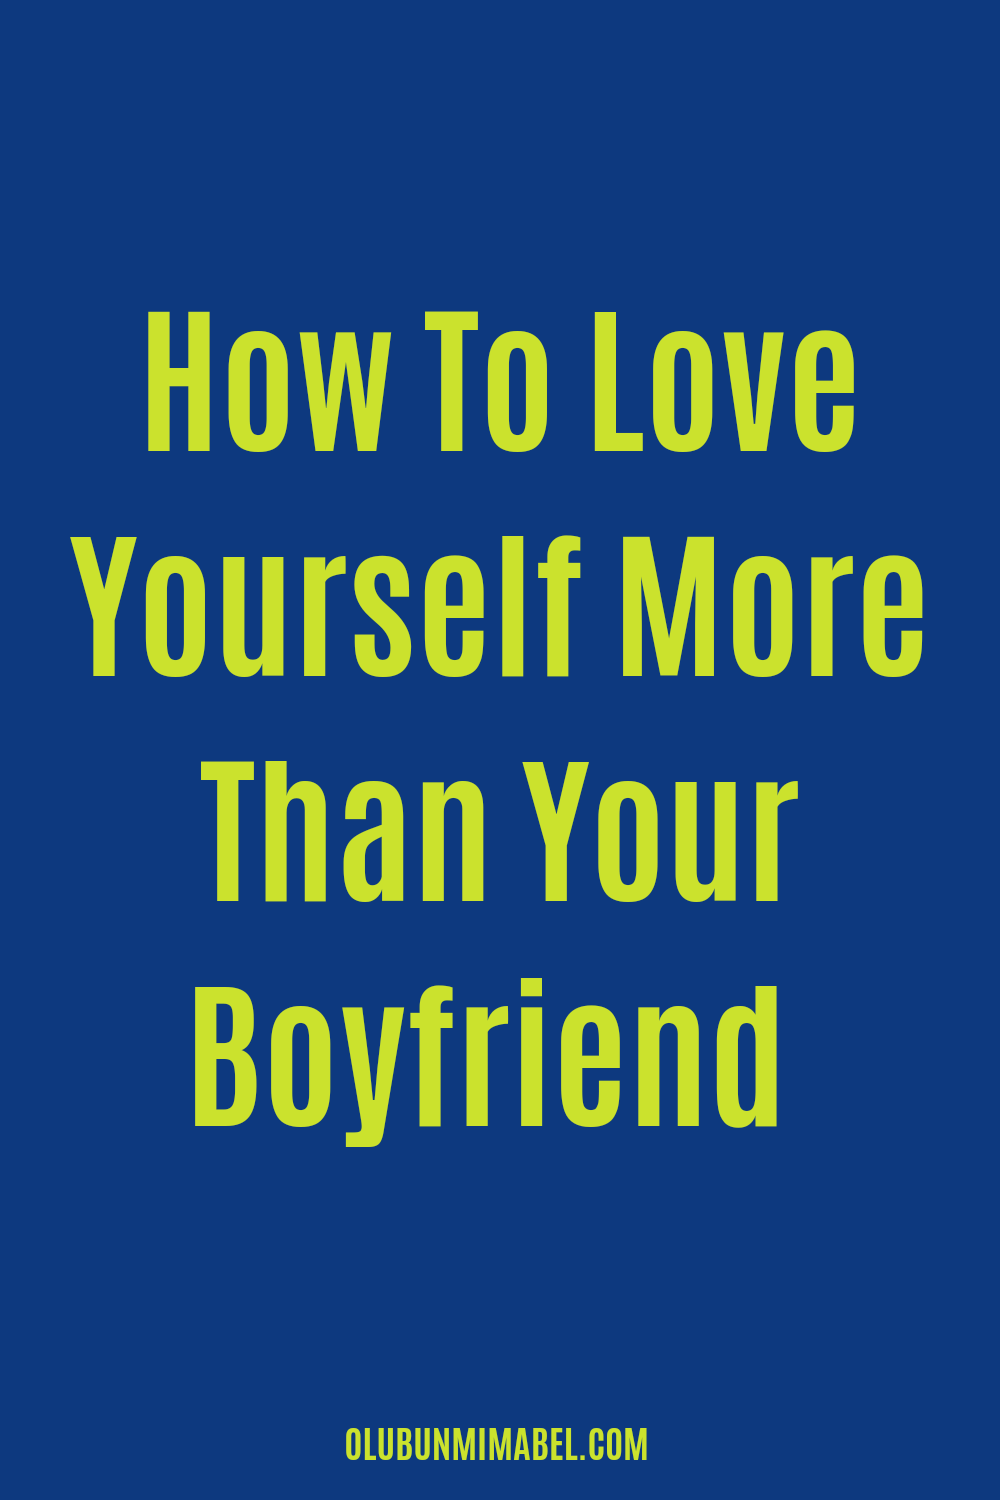 How To Love Yourself More Than Your Boyfriend